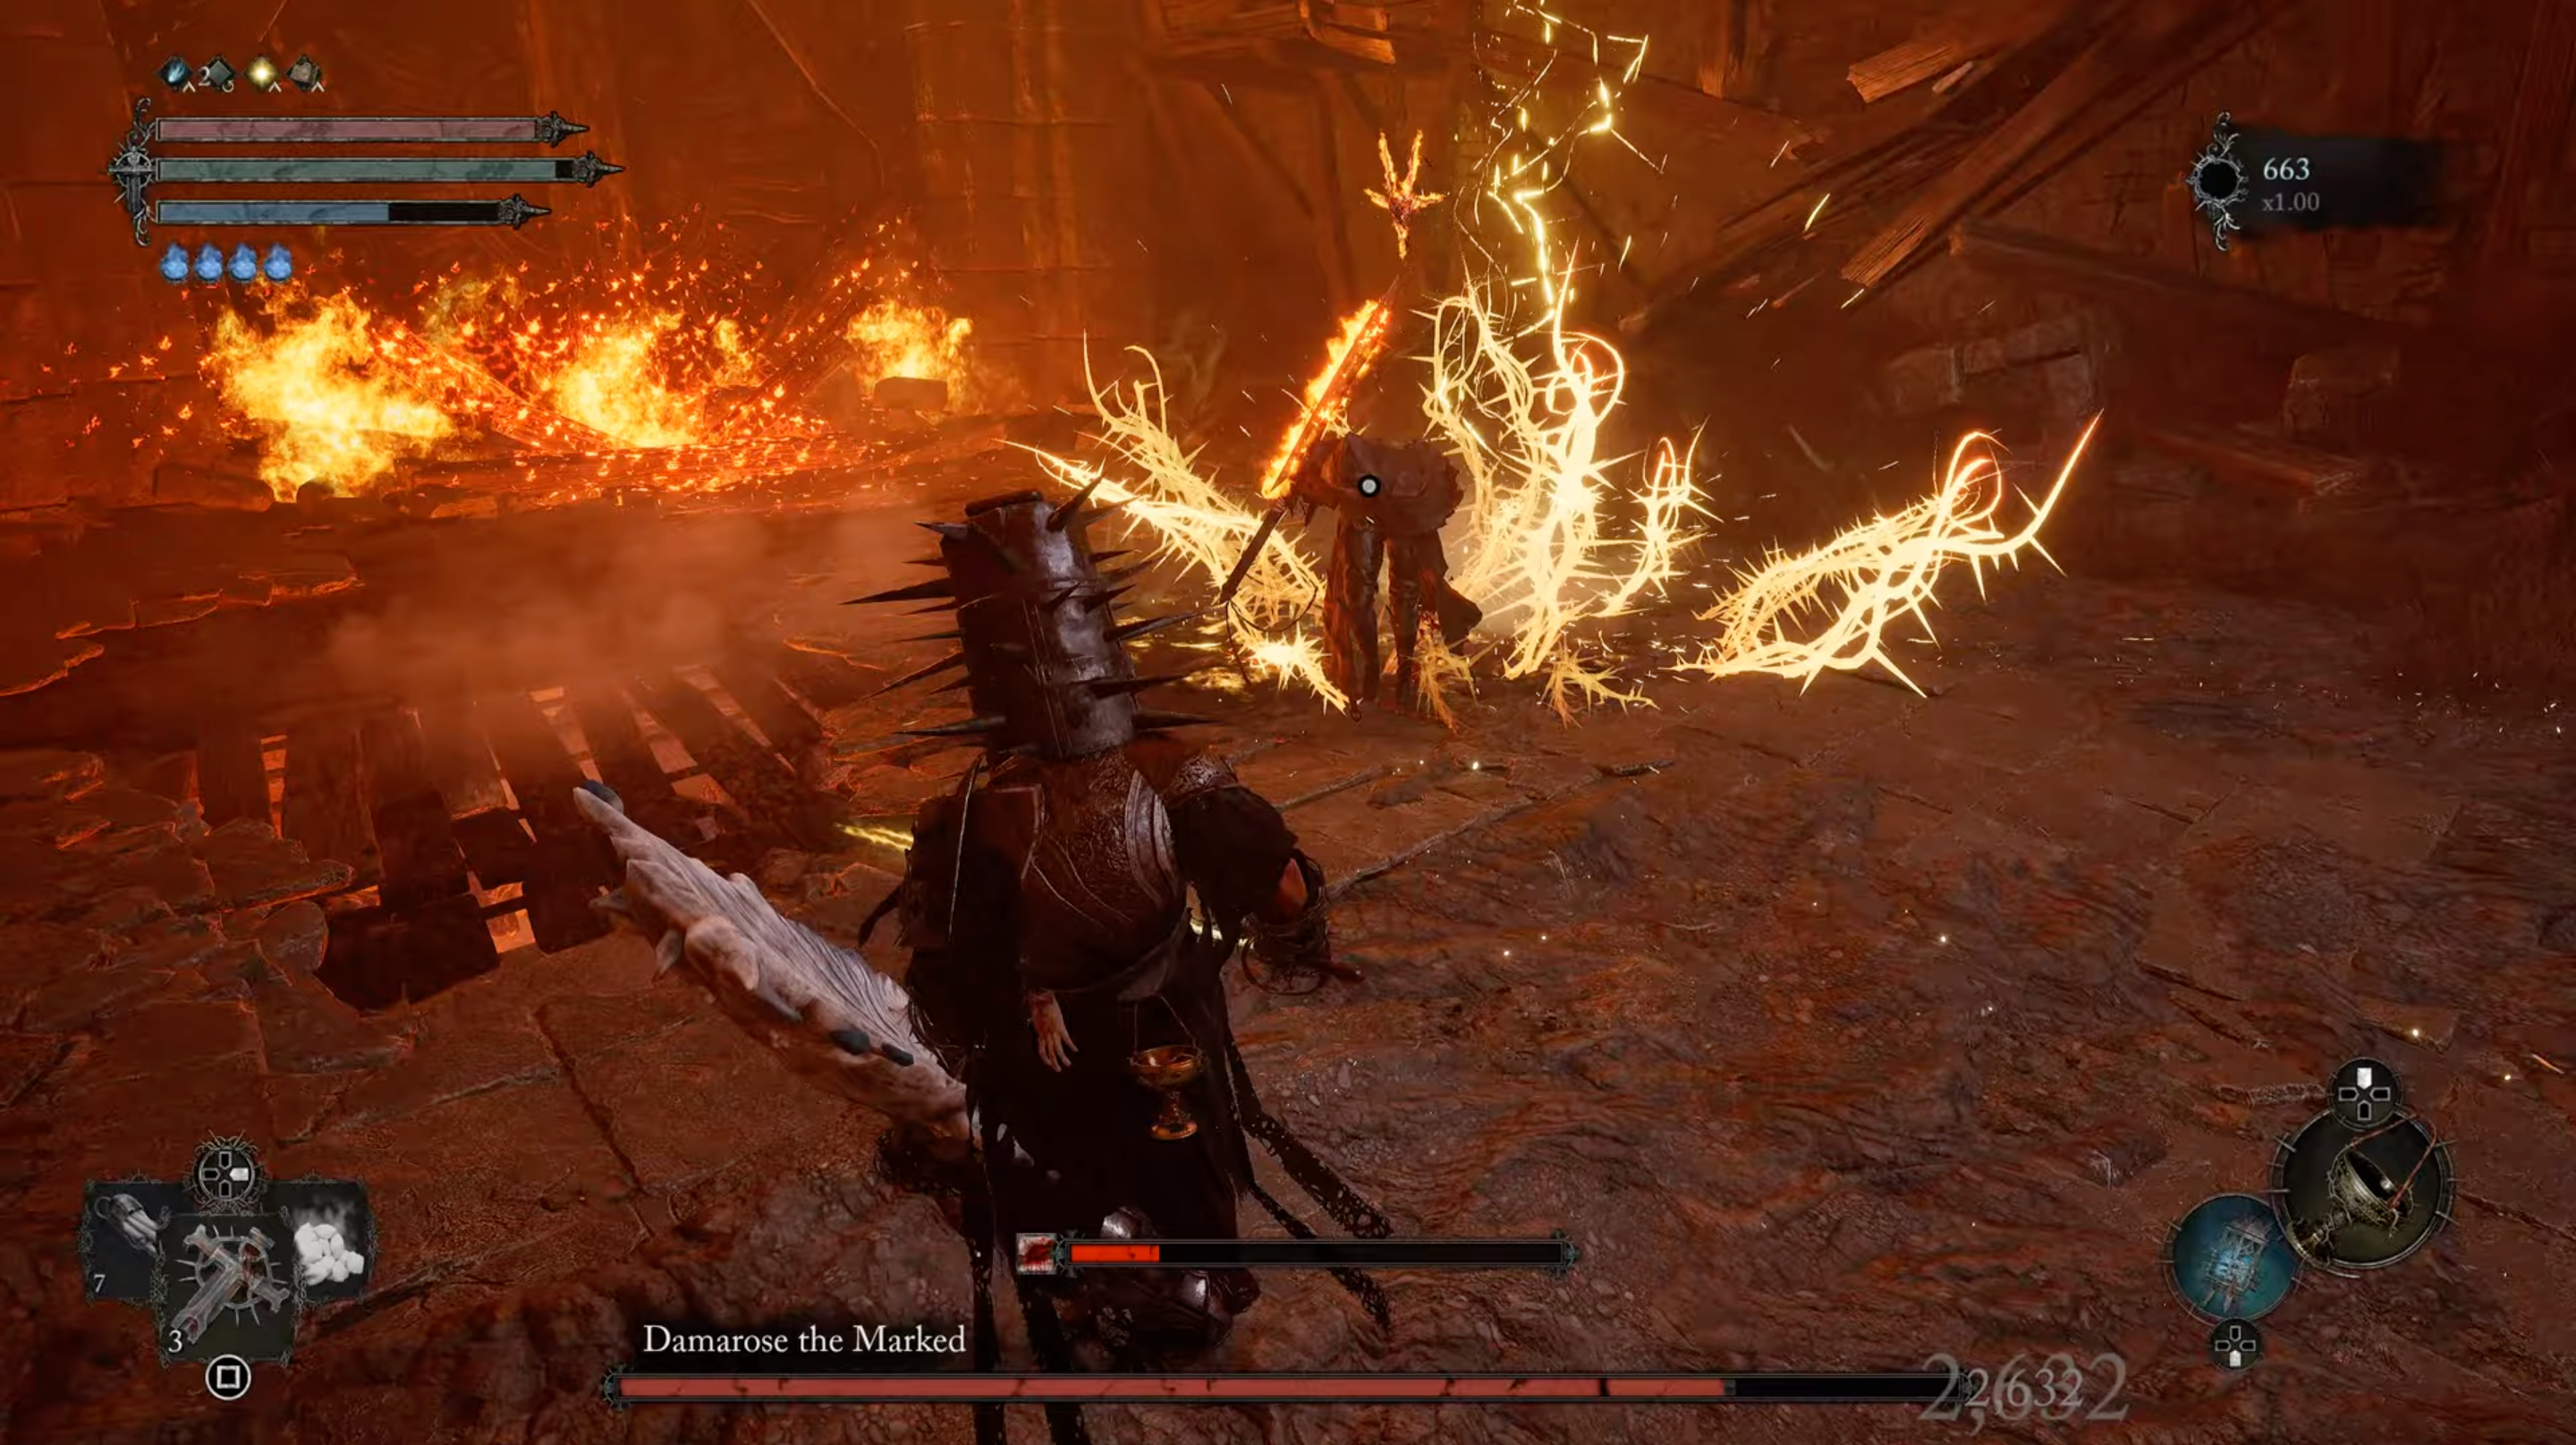 The player fighting Damarose the Marked.